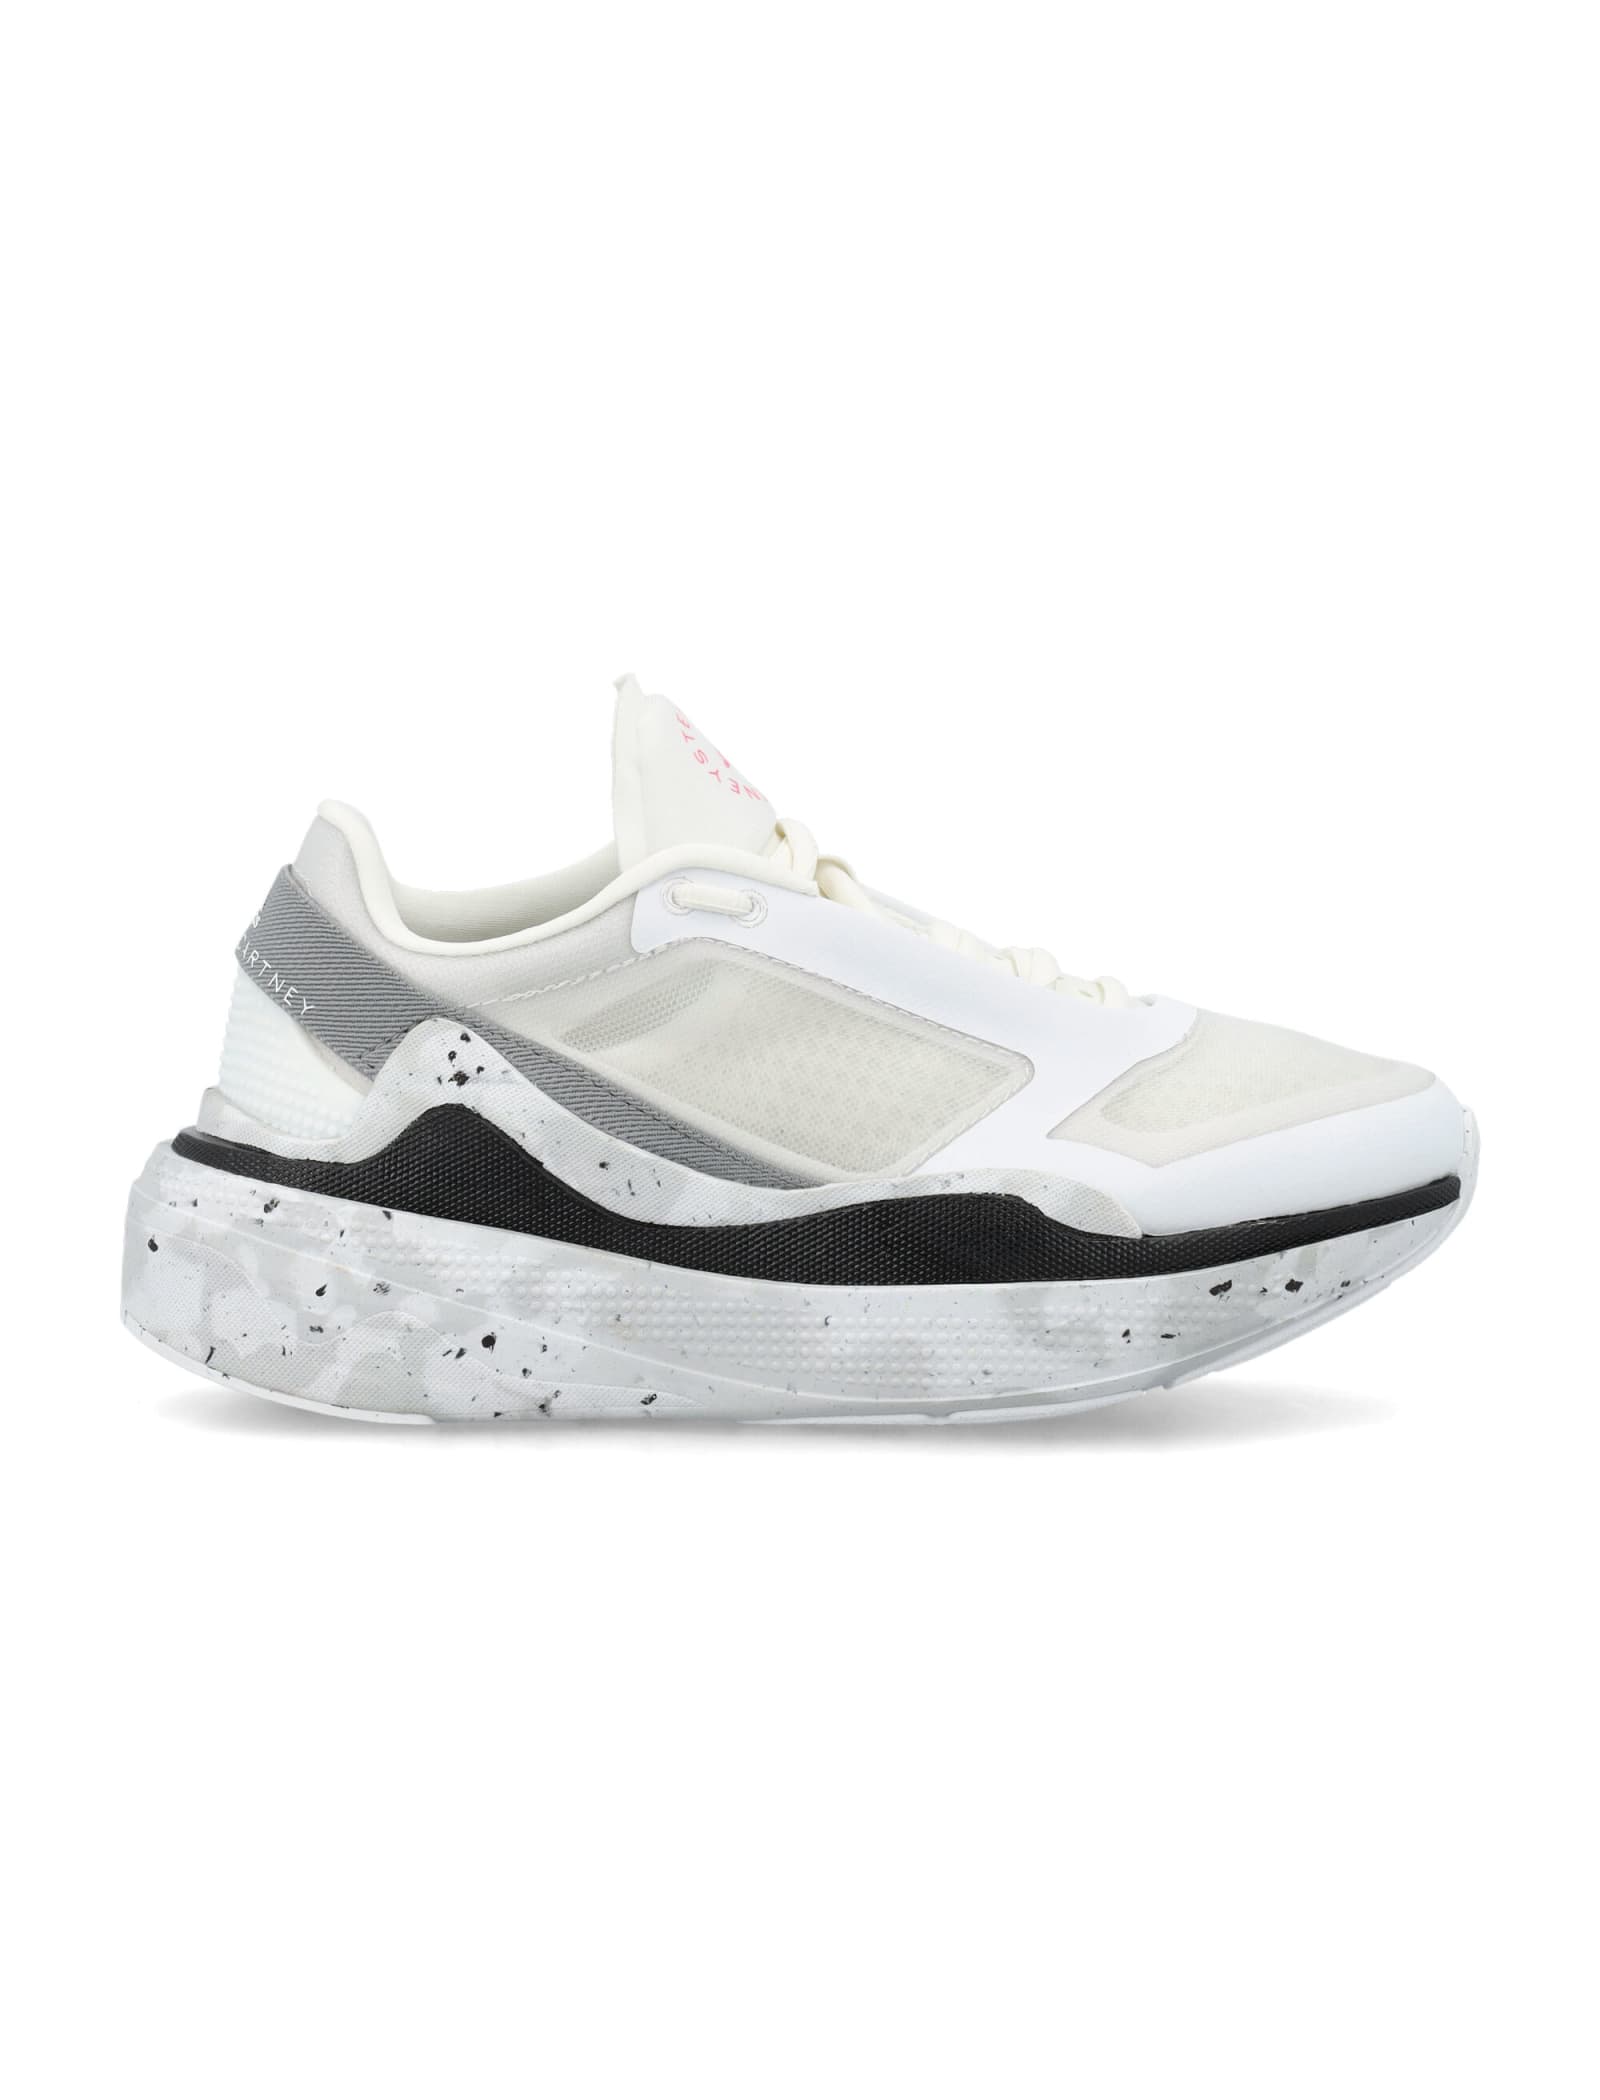 Shop Adidas By Stella Mccartney Womans Eartlight Mesh Running Shoes In White